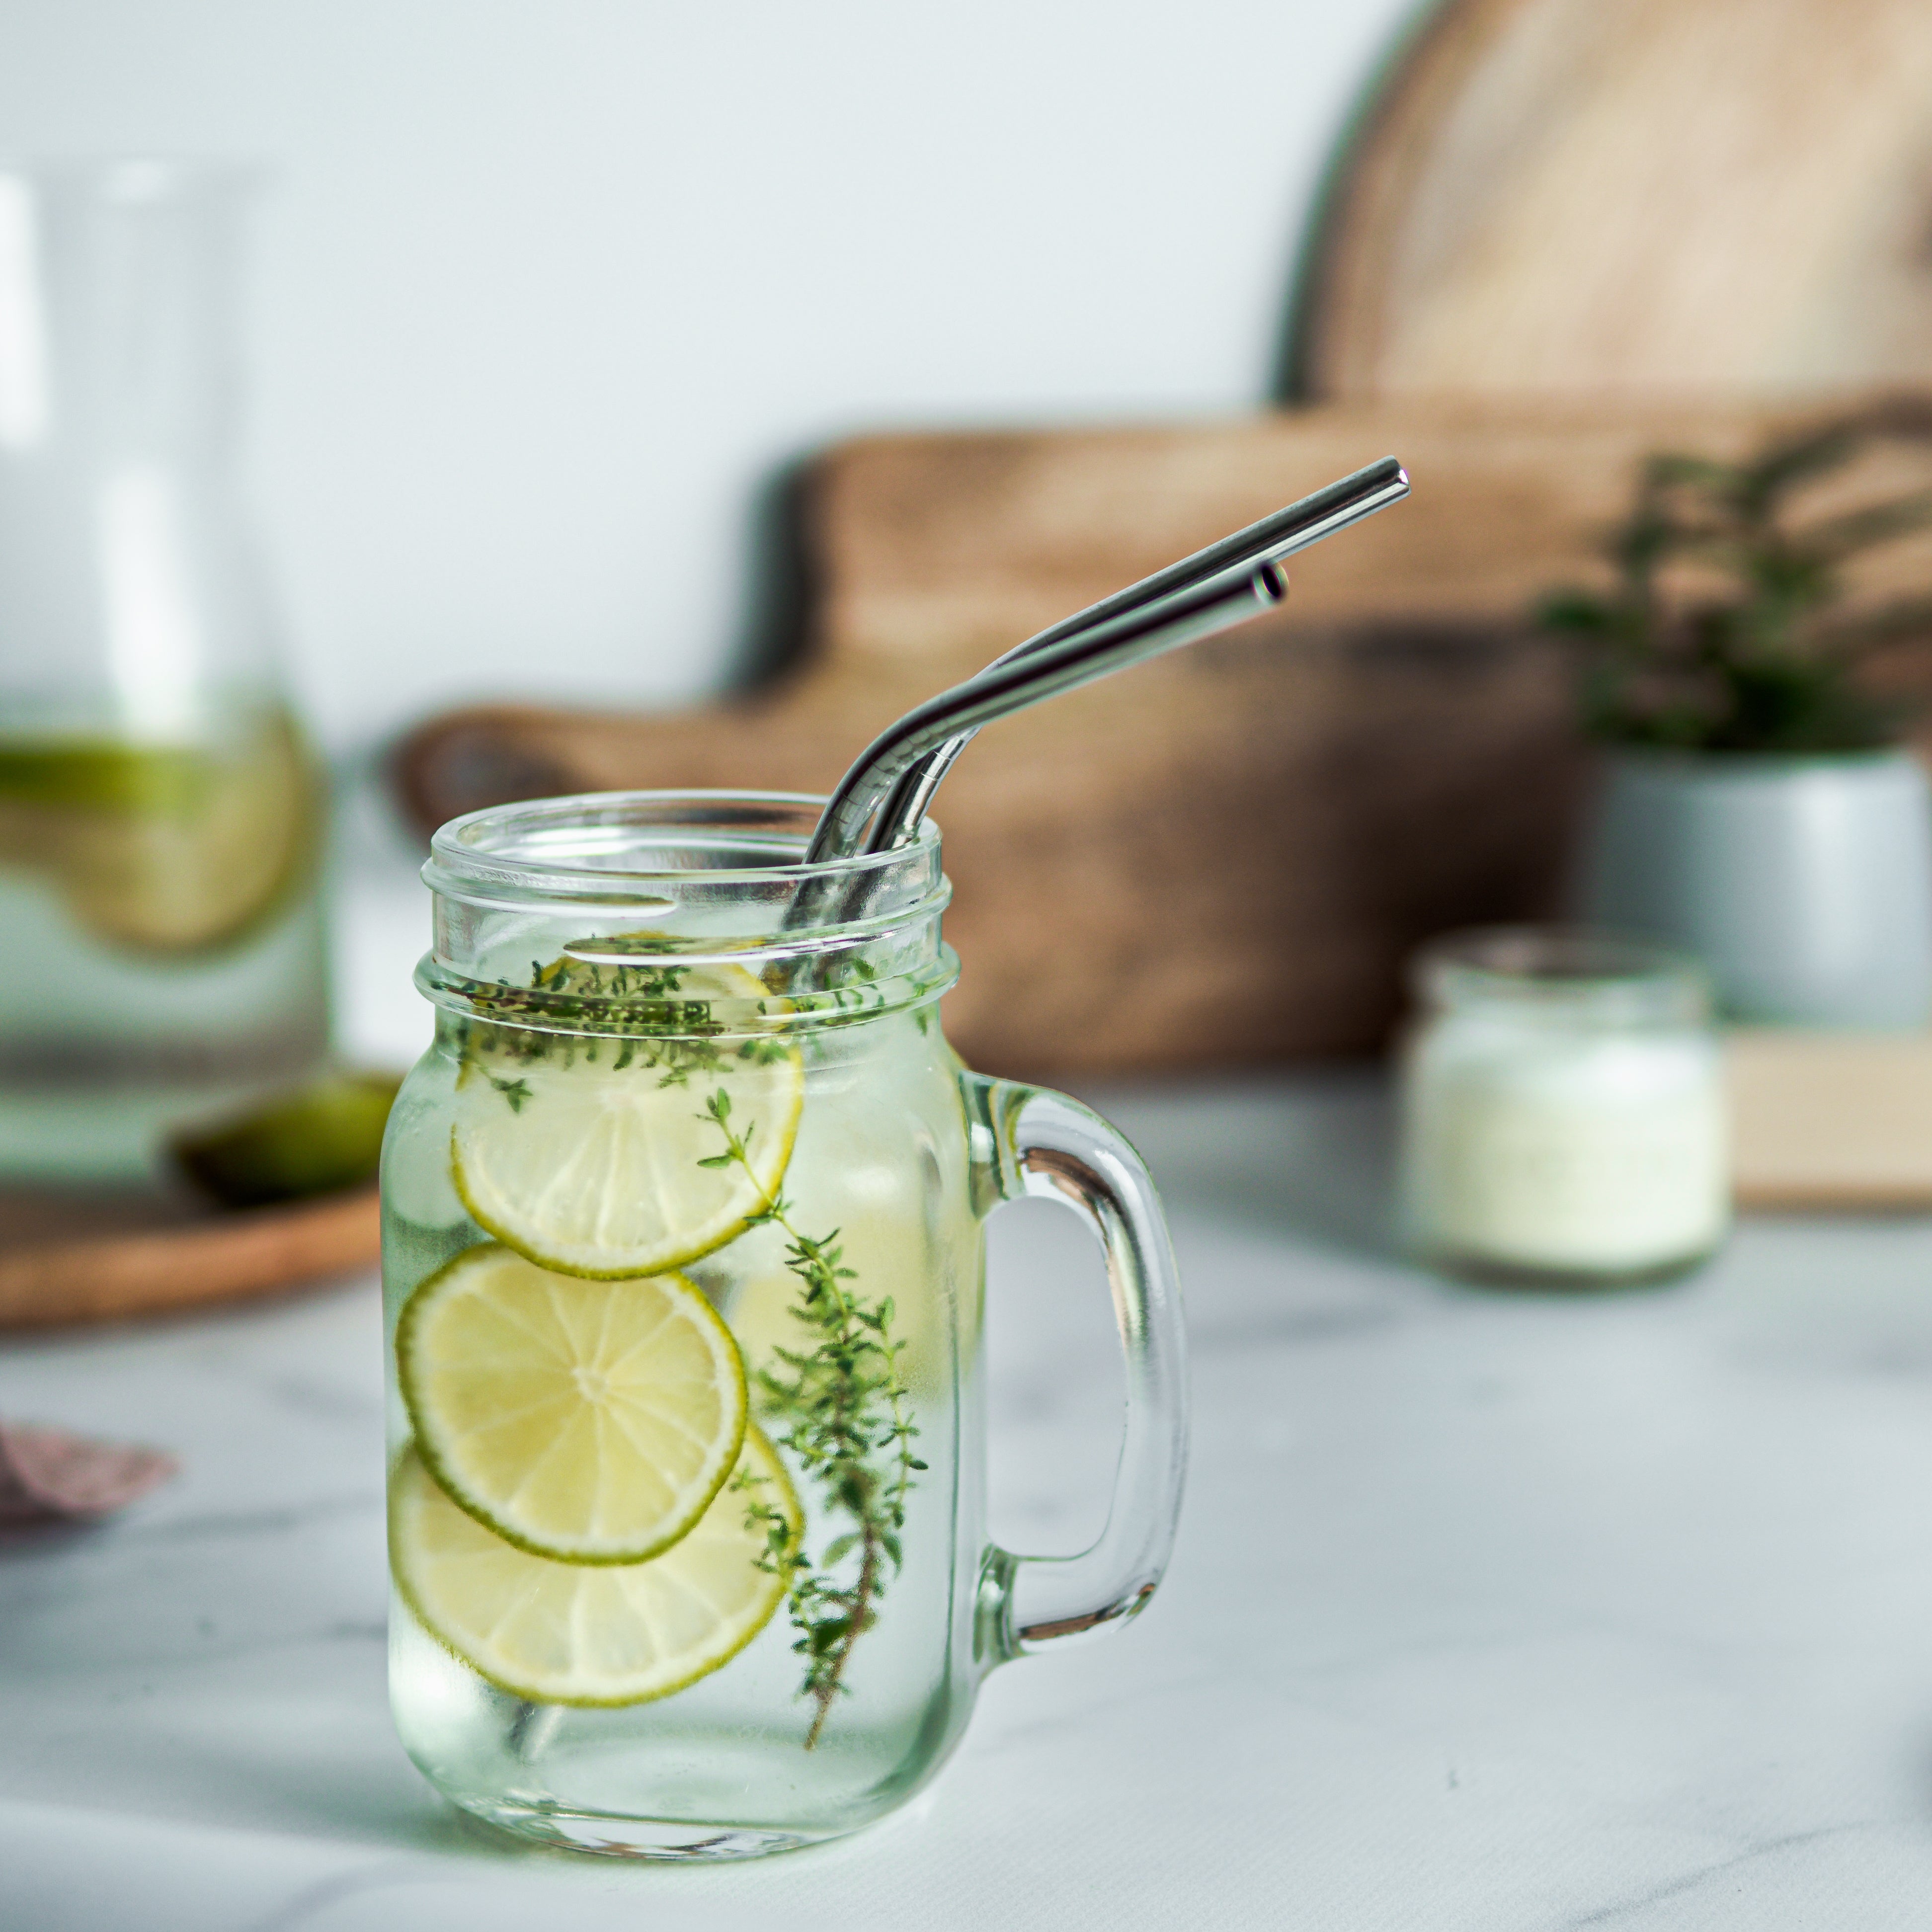 Make a lime and thyme-infused water to support your immunity